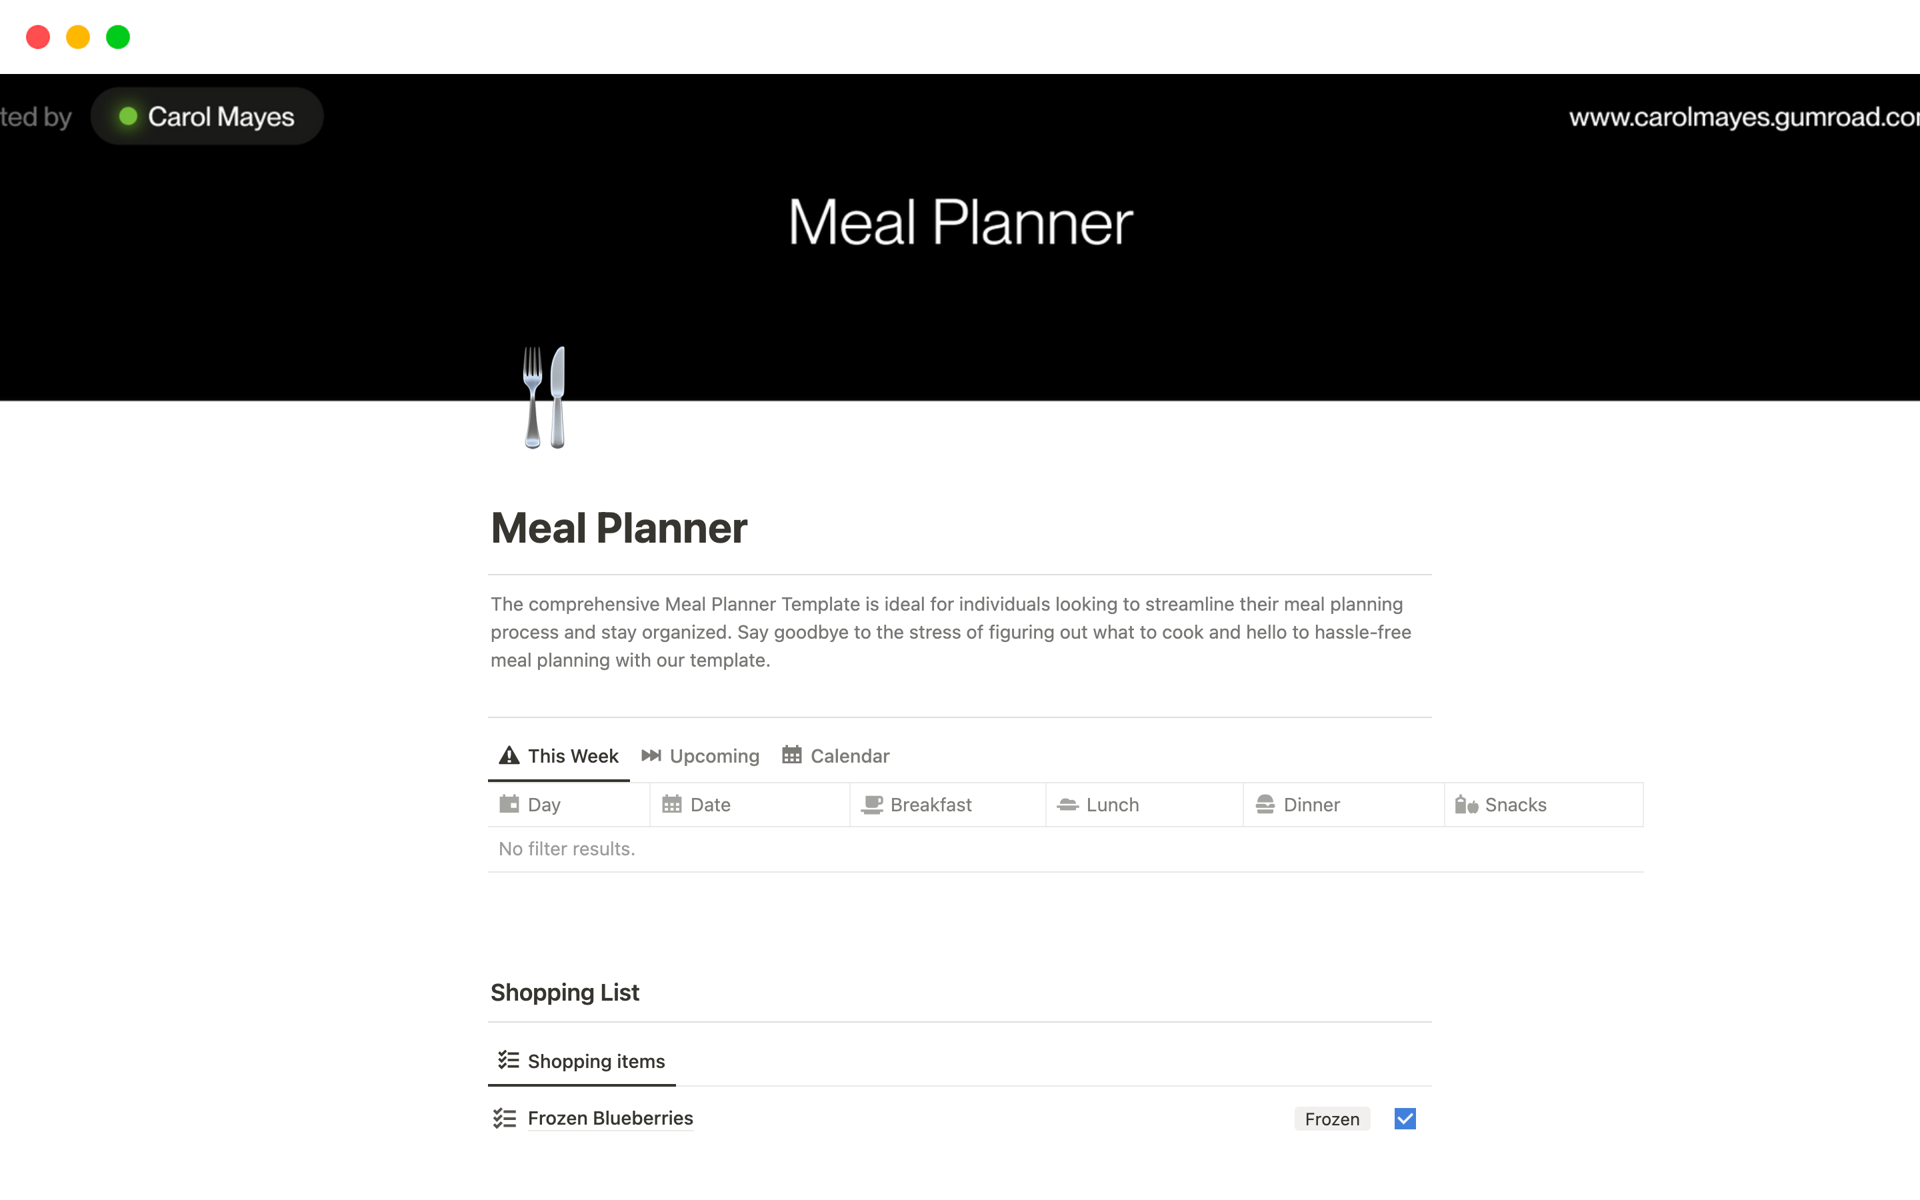 The comprehensive Meal Planner Template is ideal for individuals looking to streamline their meal planning process and stay organized.